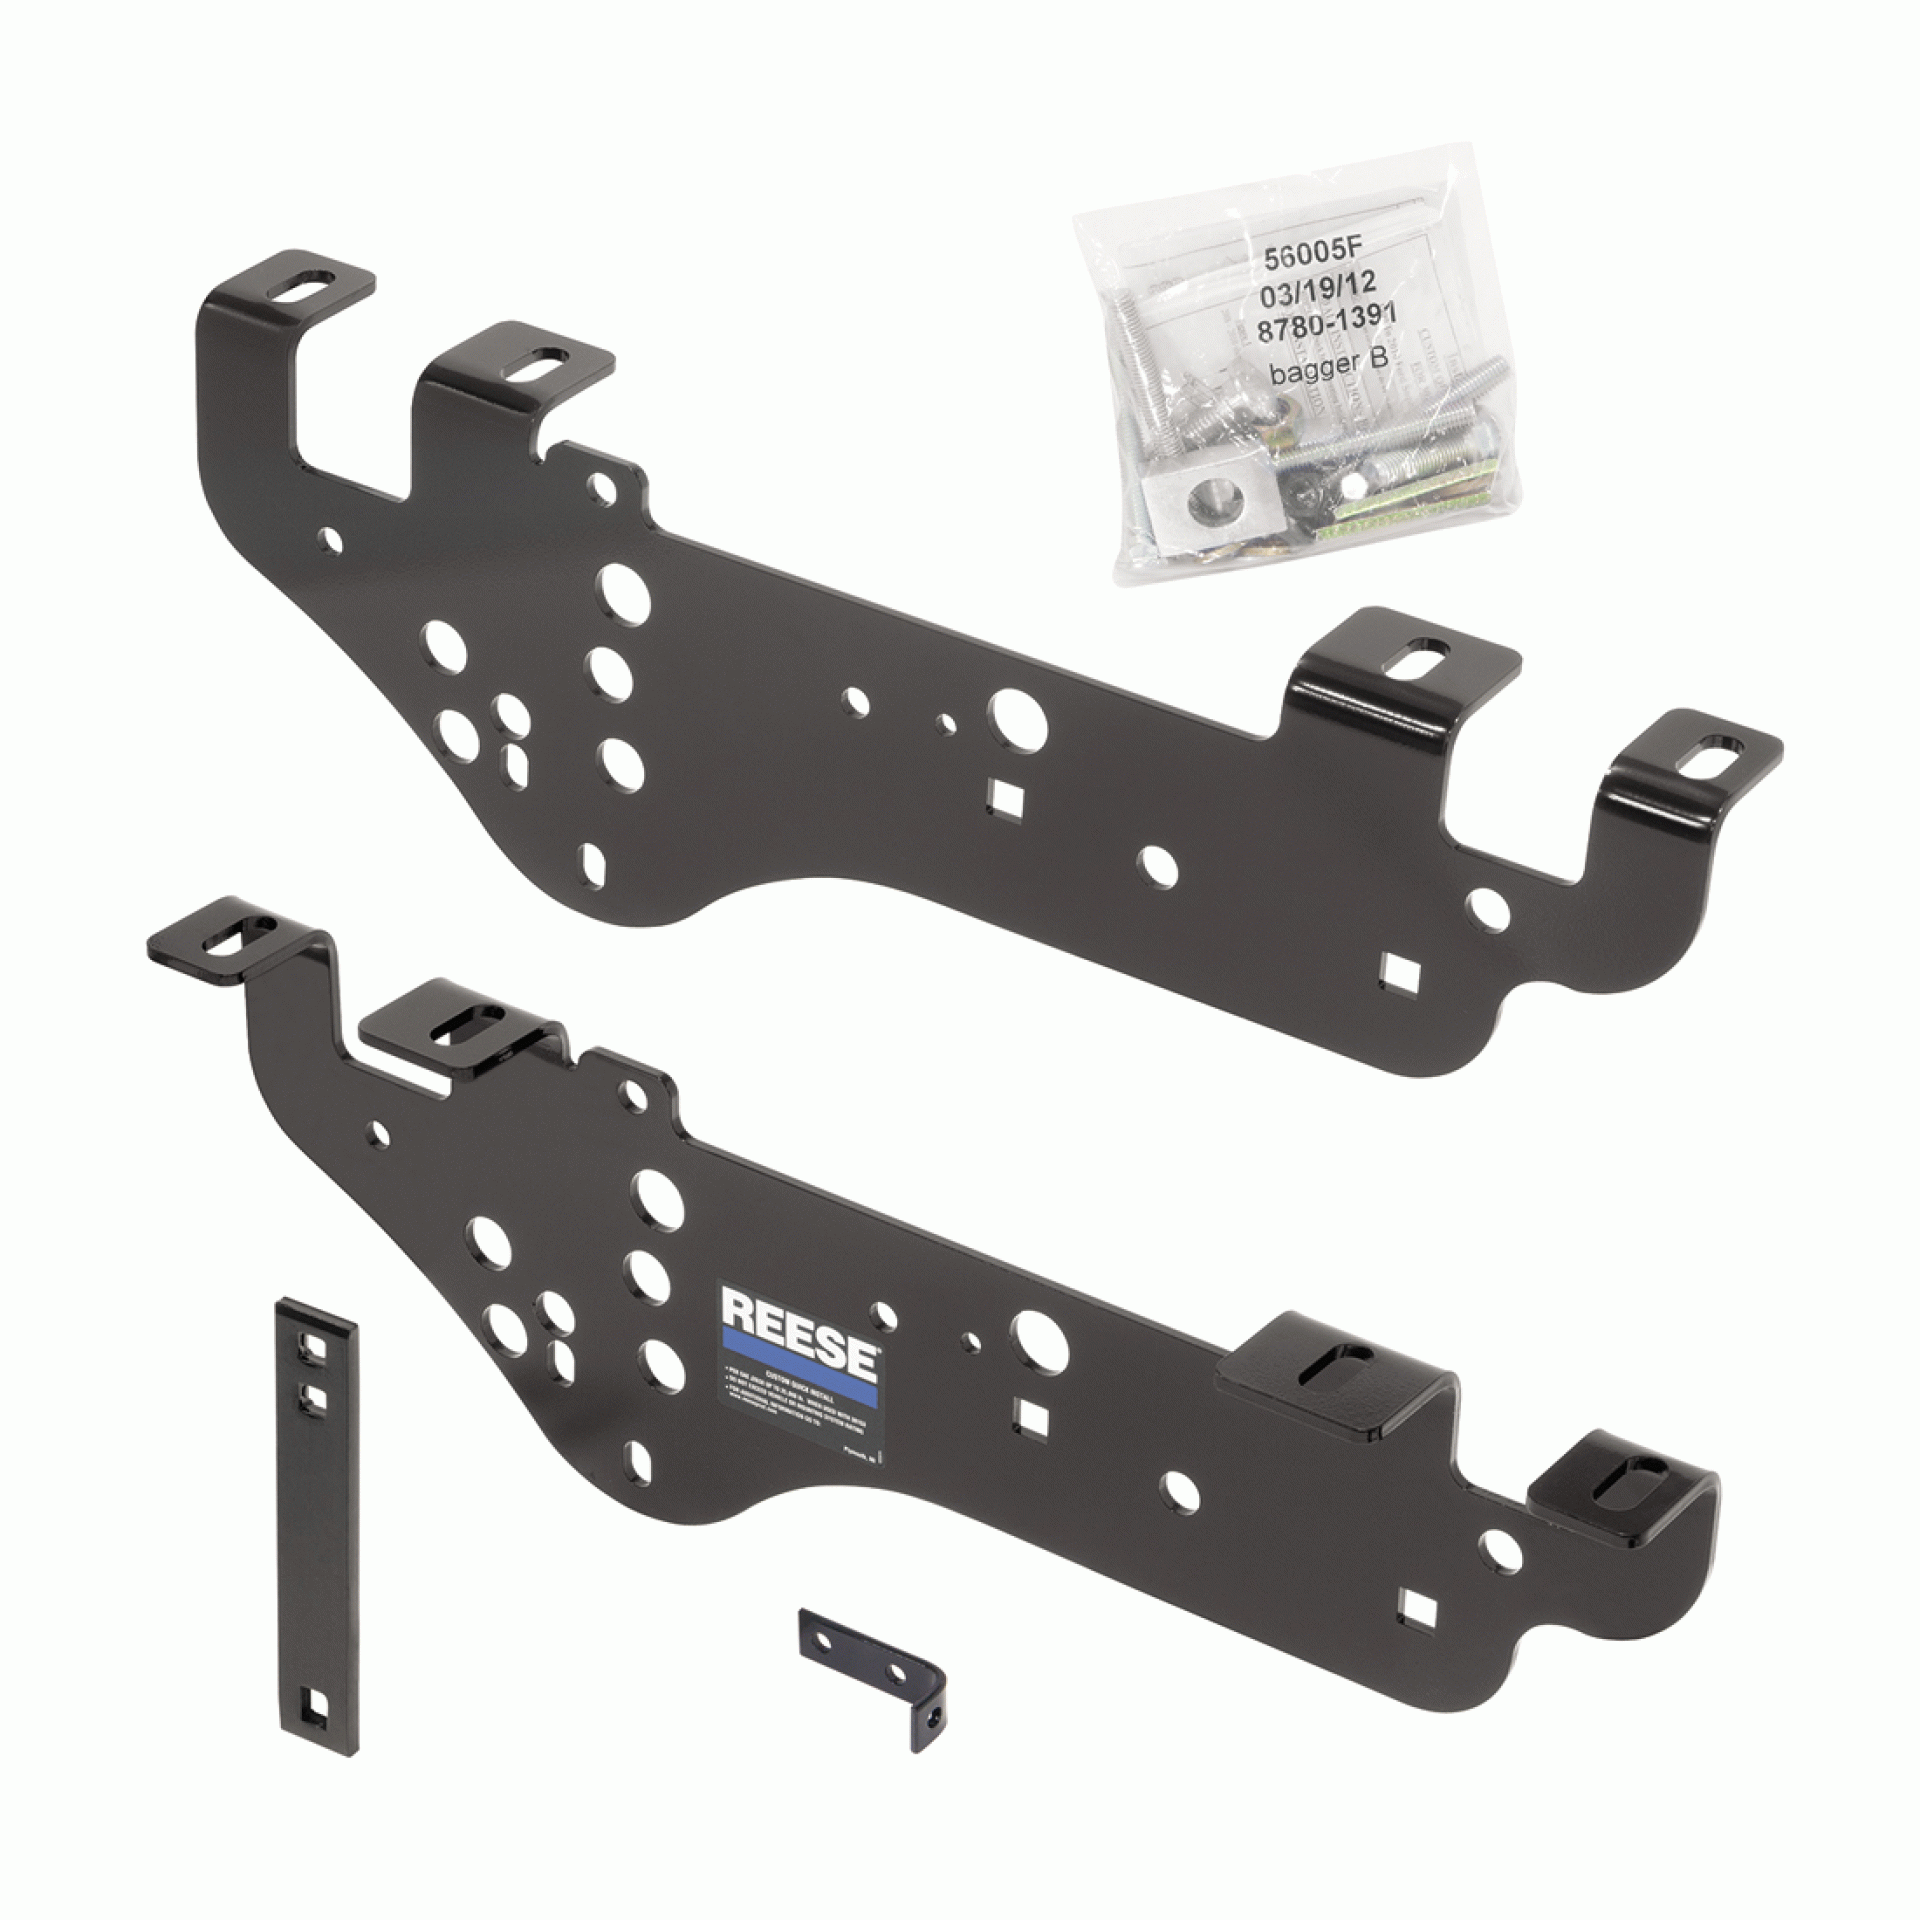 REESE | 56005 | BRACKET KIT FOR FIFTH WHEEL OUTBOARD QUICK INSTALL BRACKETS MUST BE USED WITH 5630153 RAIL KIT